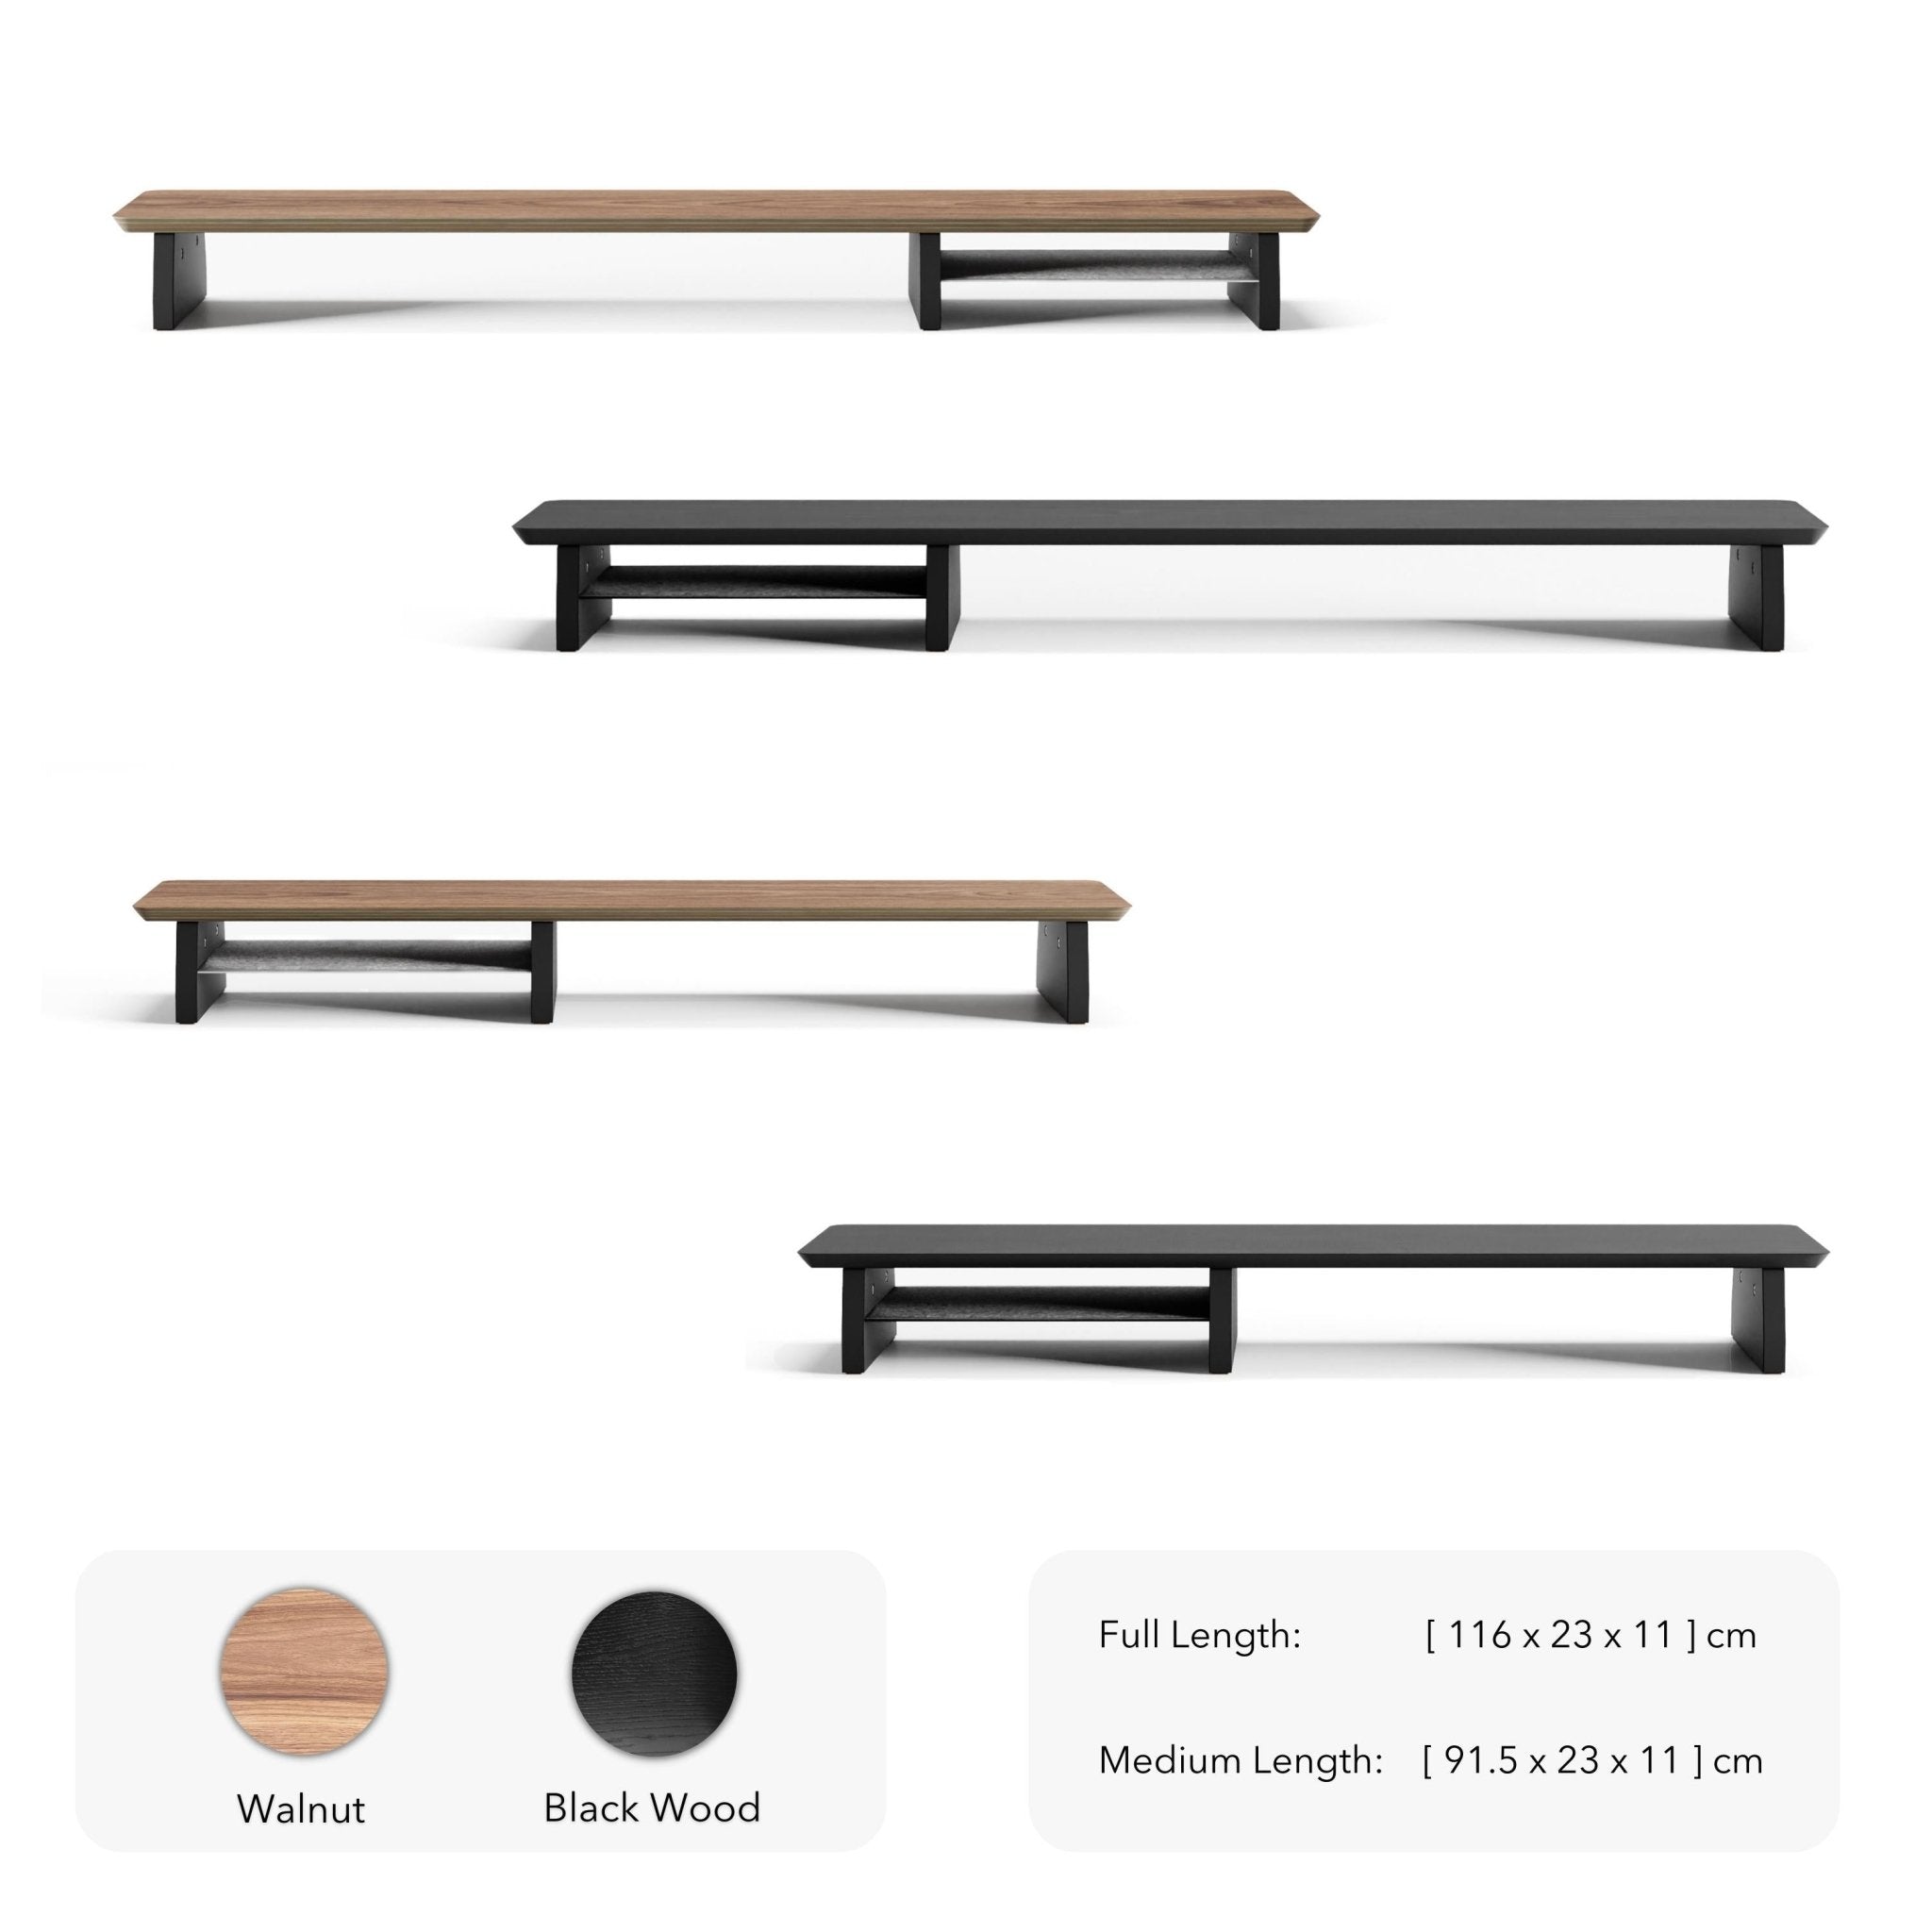 desk shelf for monitor stand is available in two colors: walnut and black. It also comes in two sizes: full length (116 cm width) and medium (91.5 cm width). 